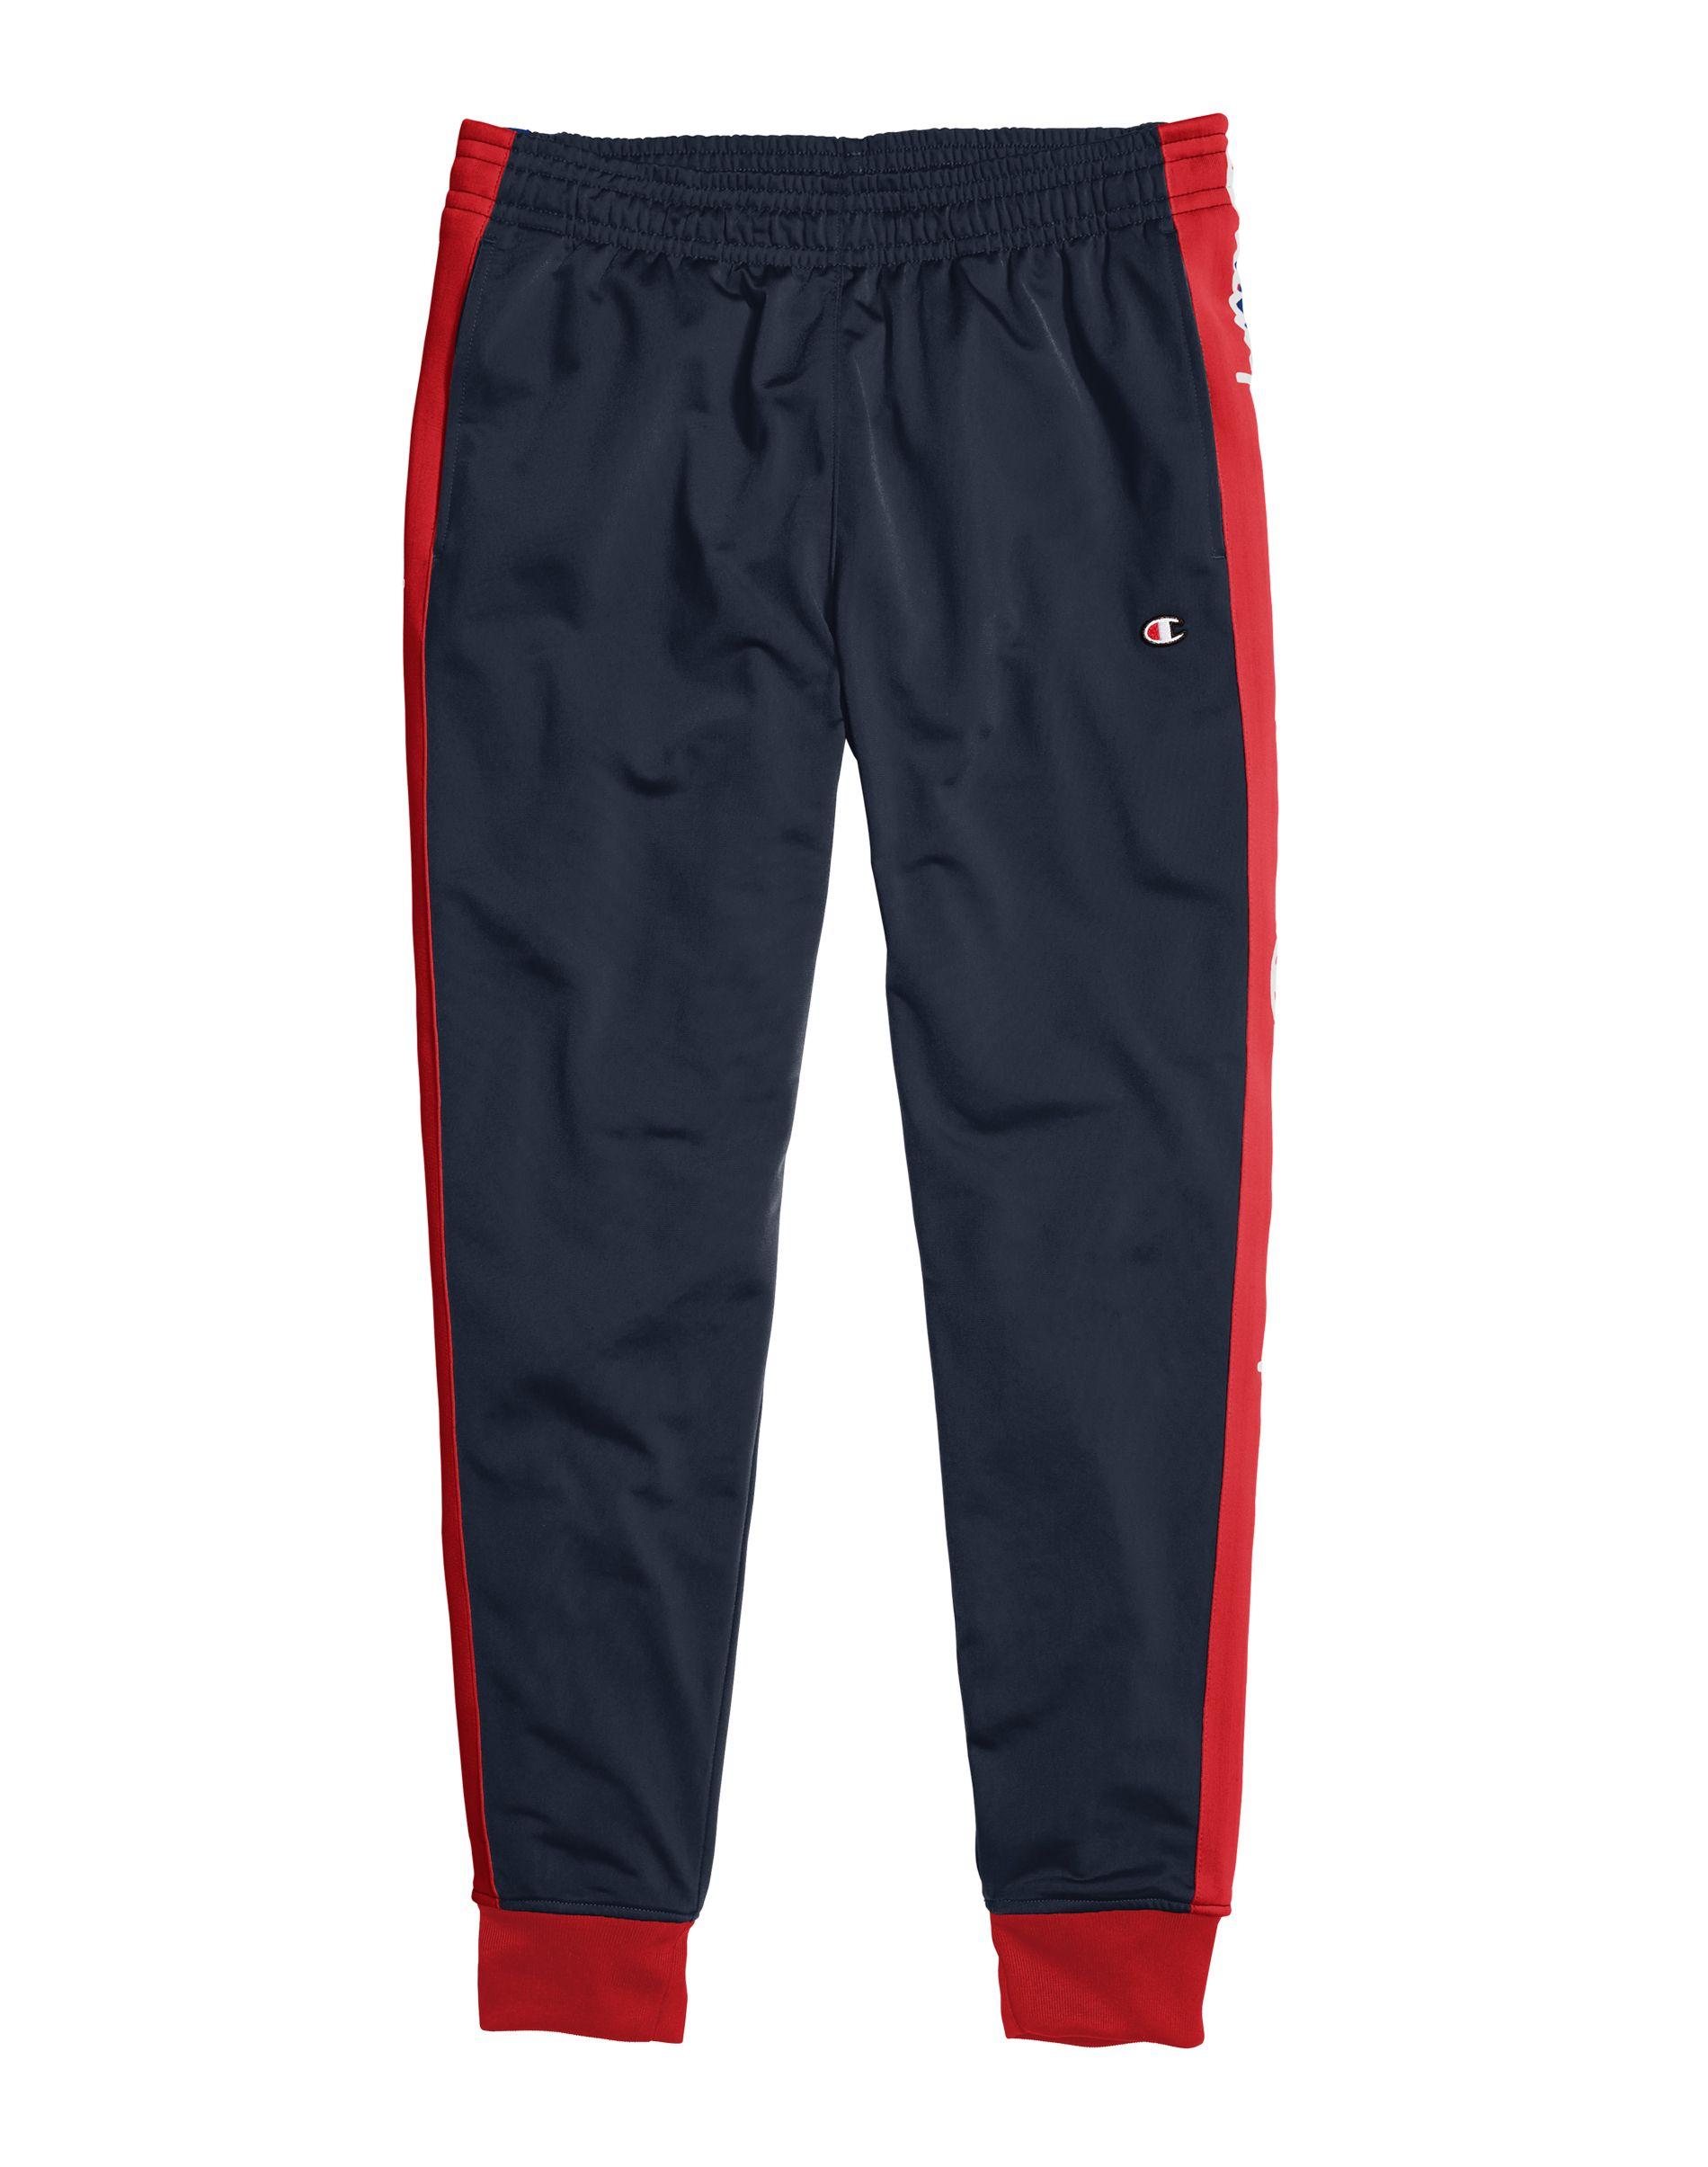 Champion Synthetic Life® Track Pants in Navy/Scarlet (Blue) for Men - Lyst